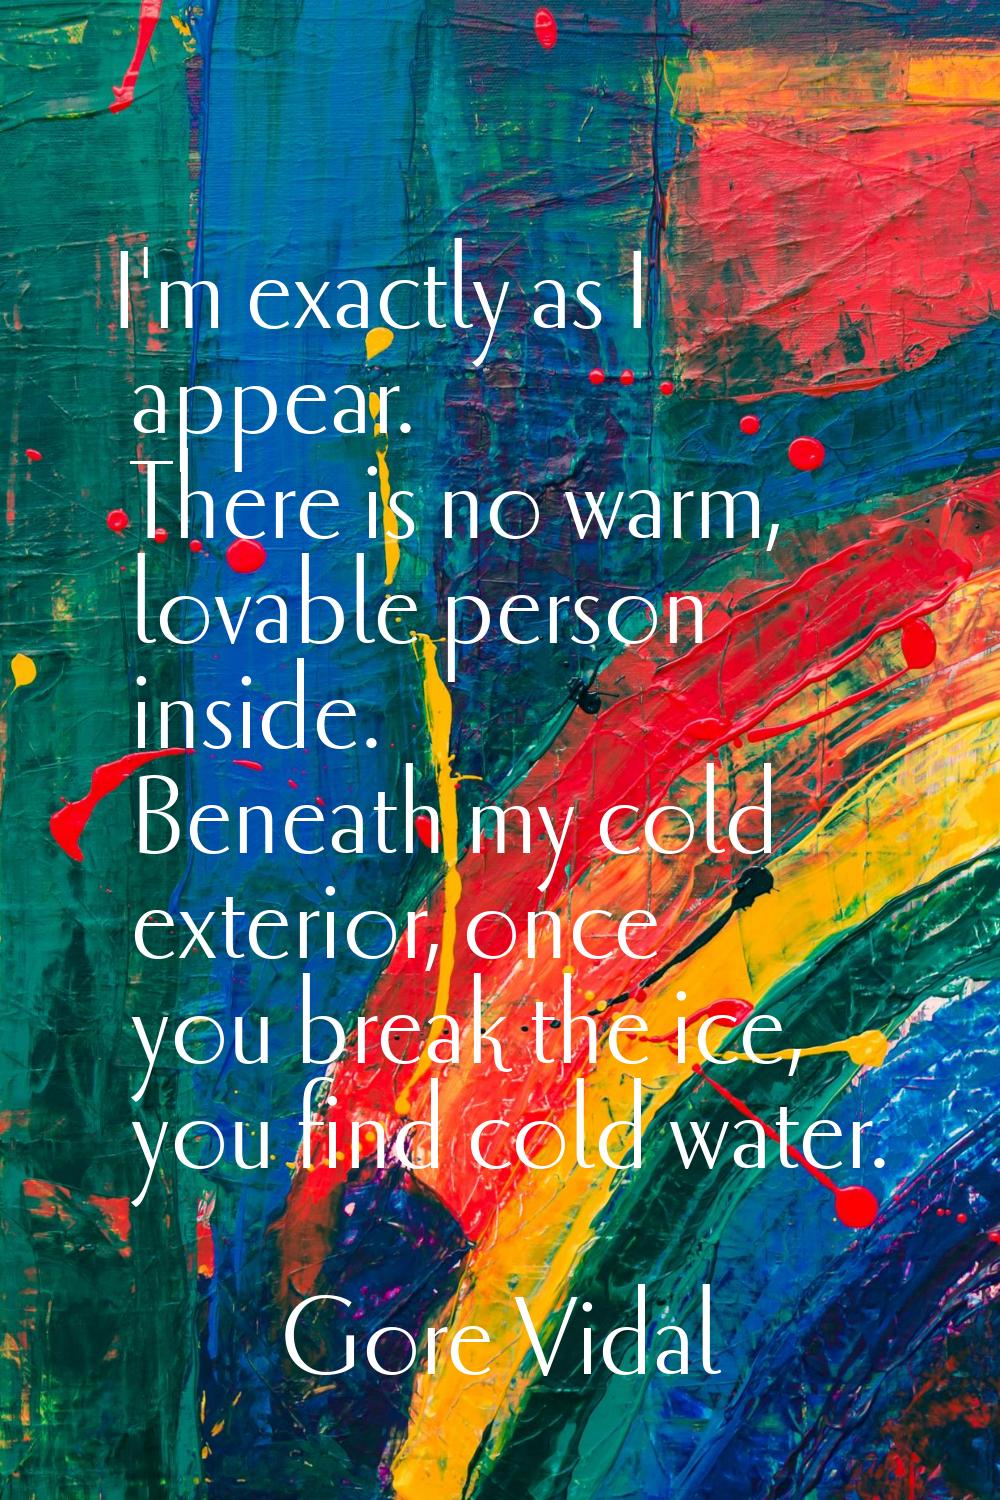 I'm exactly as I appear. There is no warm, lovable person inside. Beneath my cold exterior, once yo